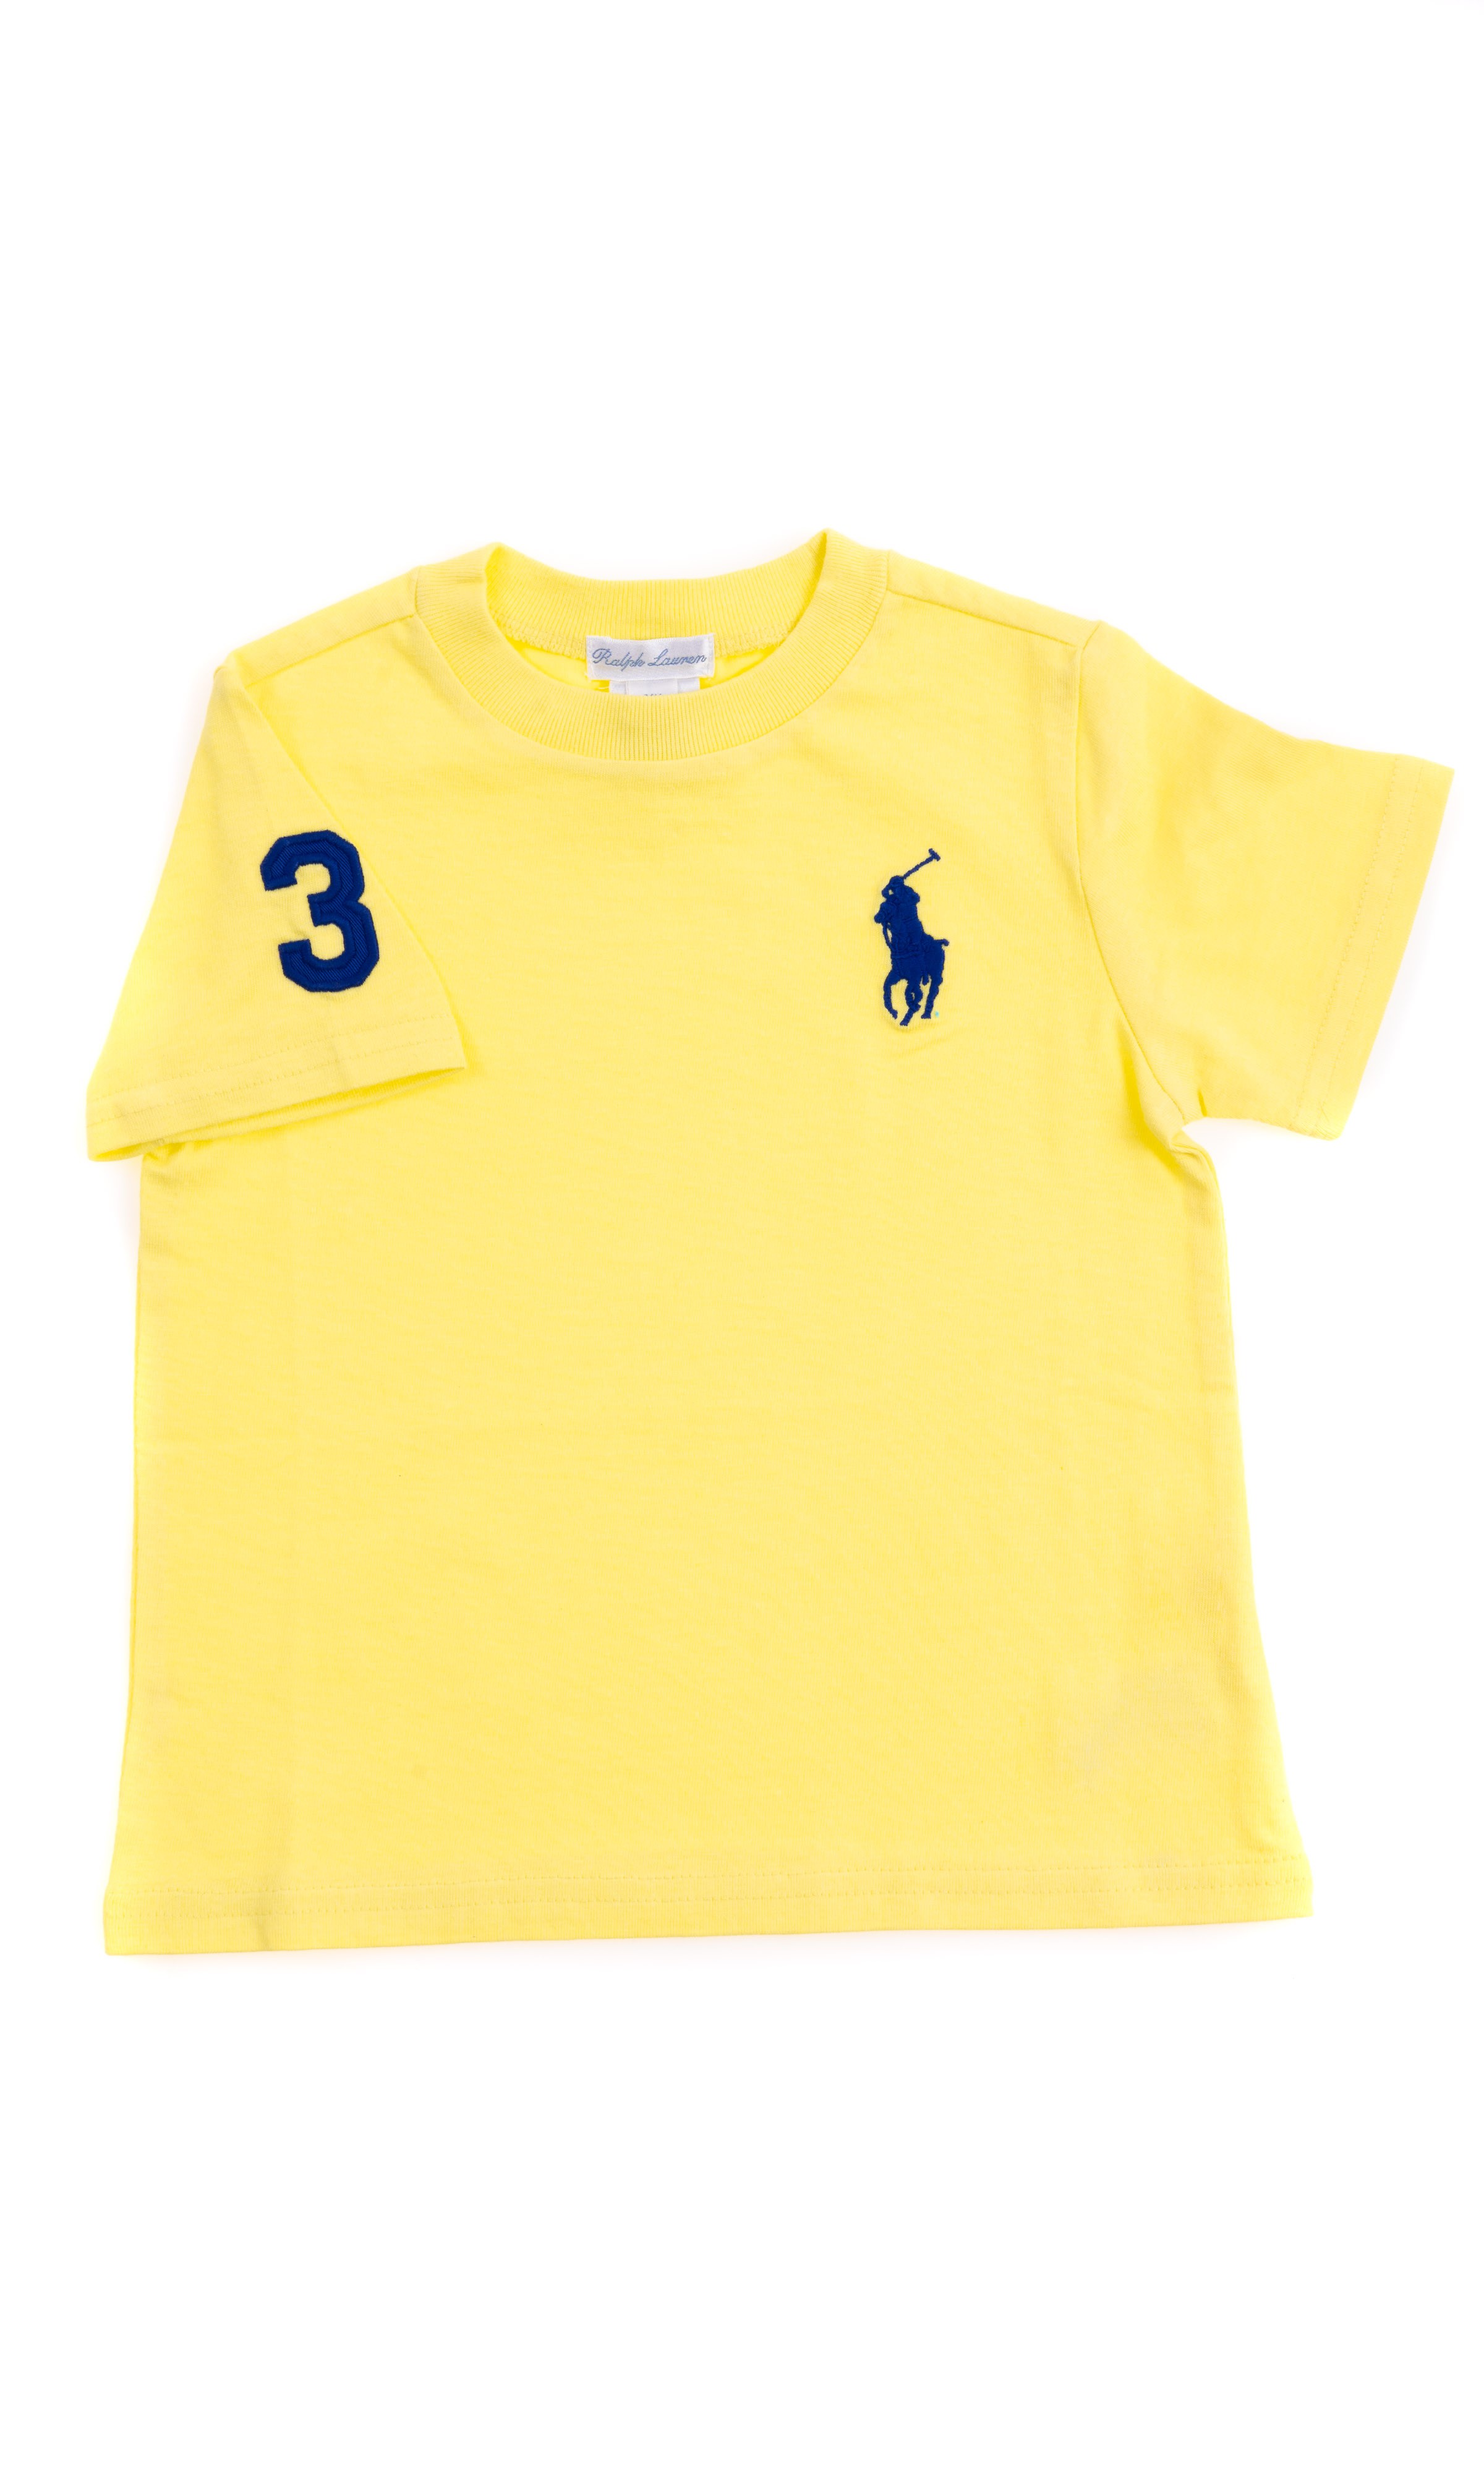 Yellow T-shirt with a sapphire horse, Polo Ralph Lauren - Celebrity-Club